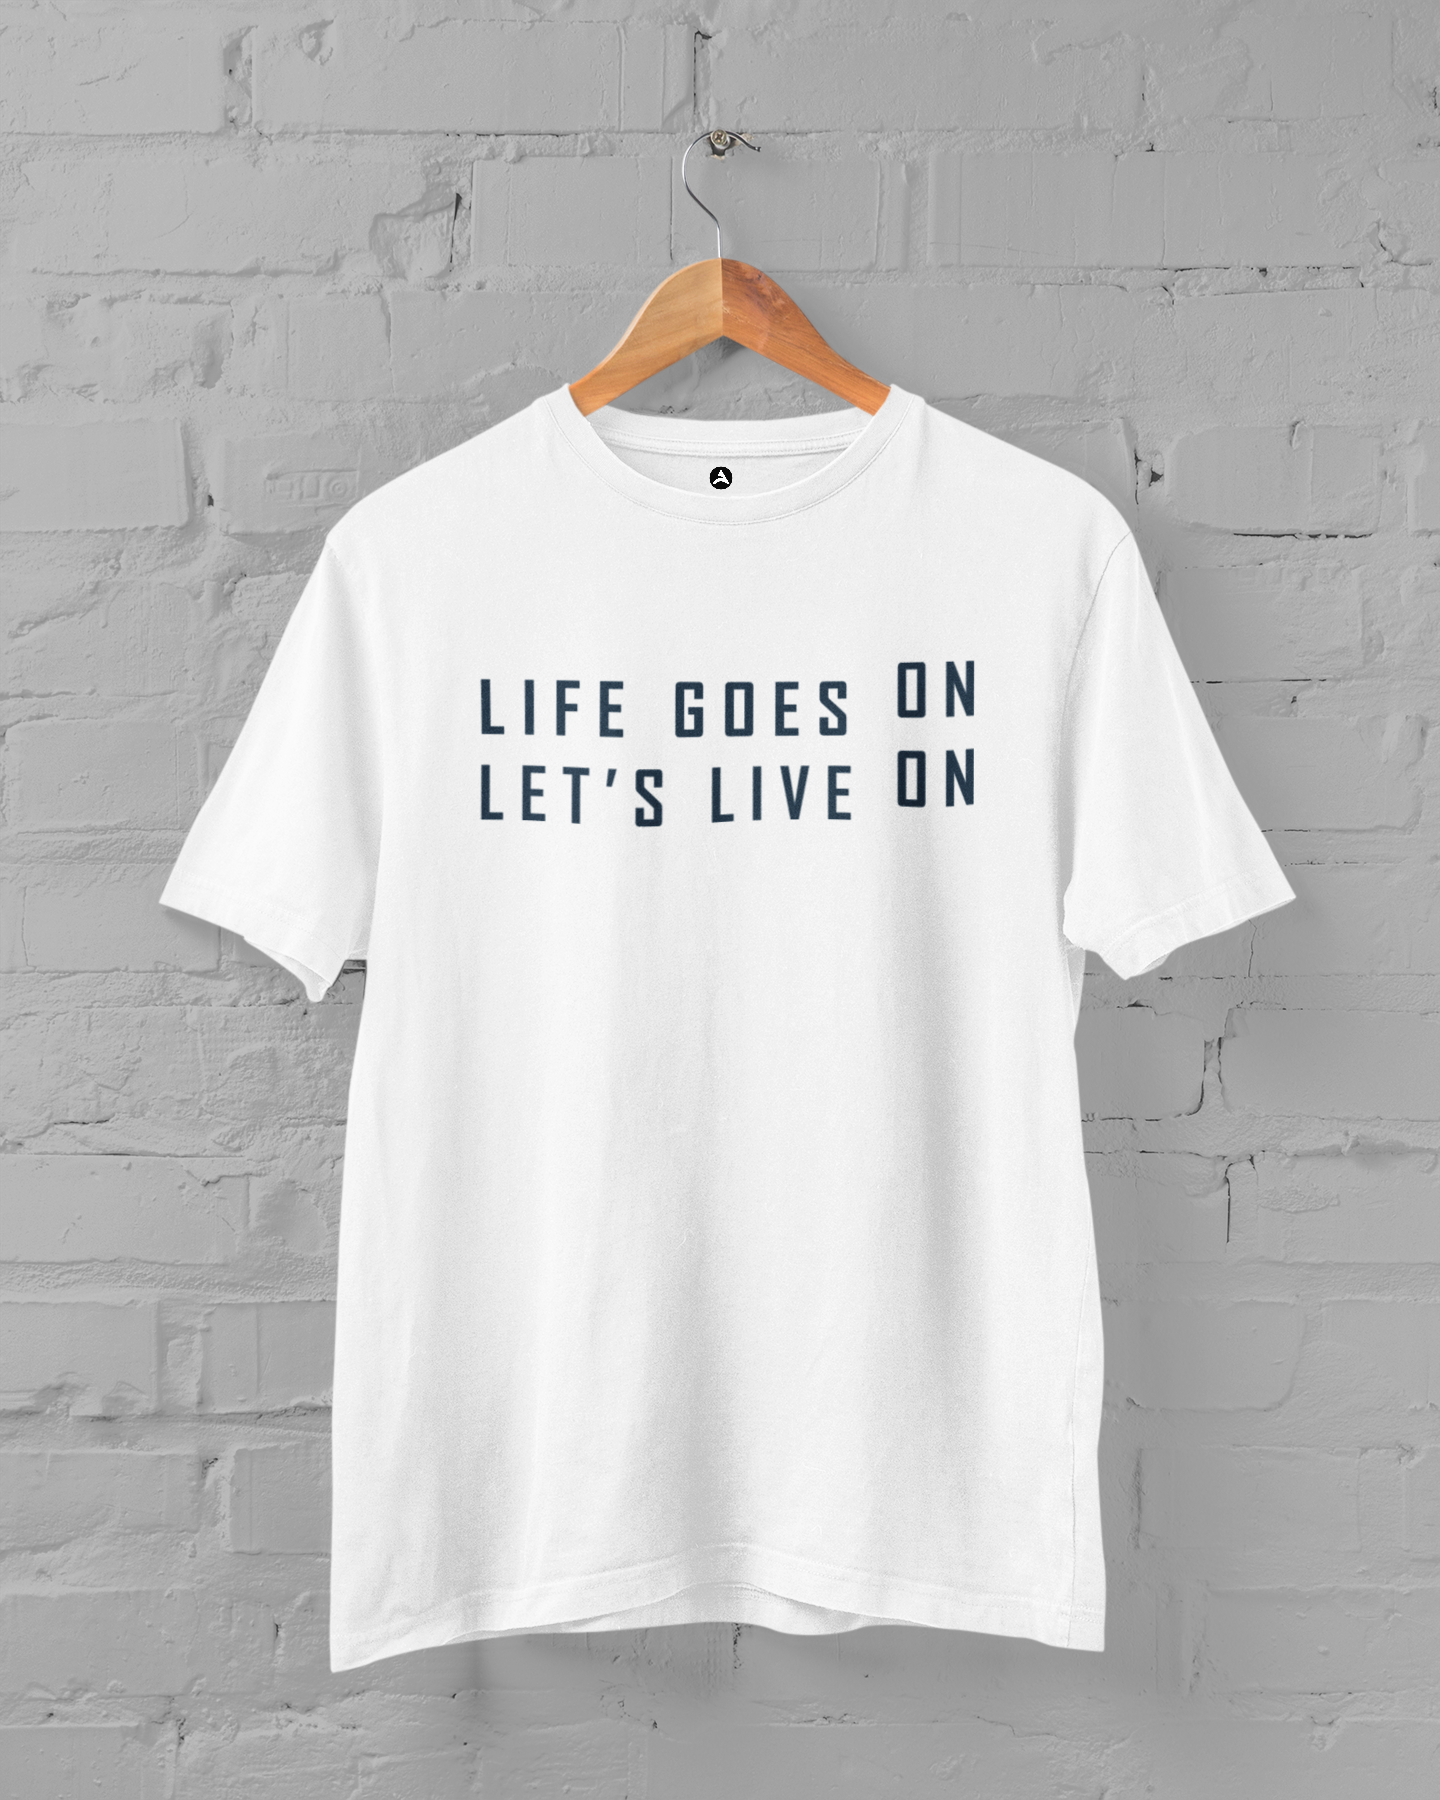 " Life goes on, let's live on : BTS - HALF-SLEEVE T-SHIRTS WHITE